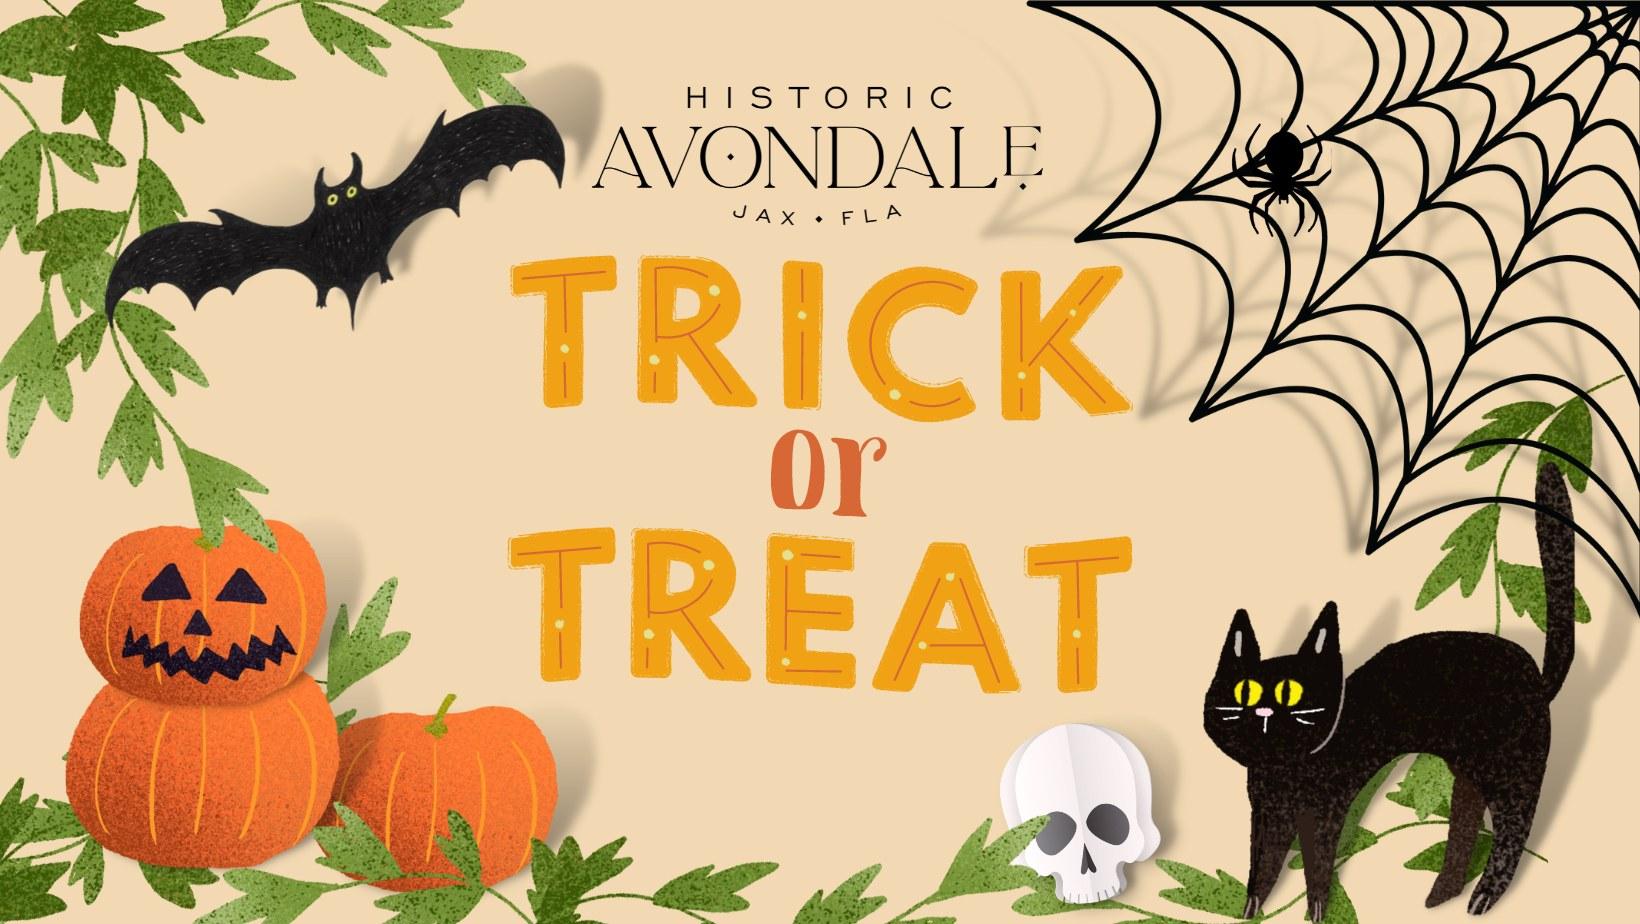 Trick or Treat on the Avenue
Fri Oct 28, 4:00 PM - Fri Oct 28, 6:00 PM
in 8 days